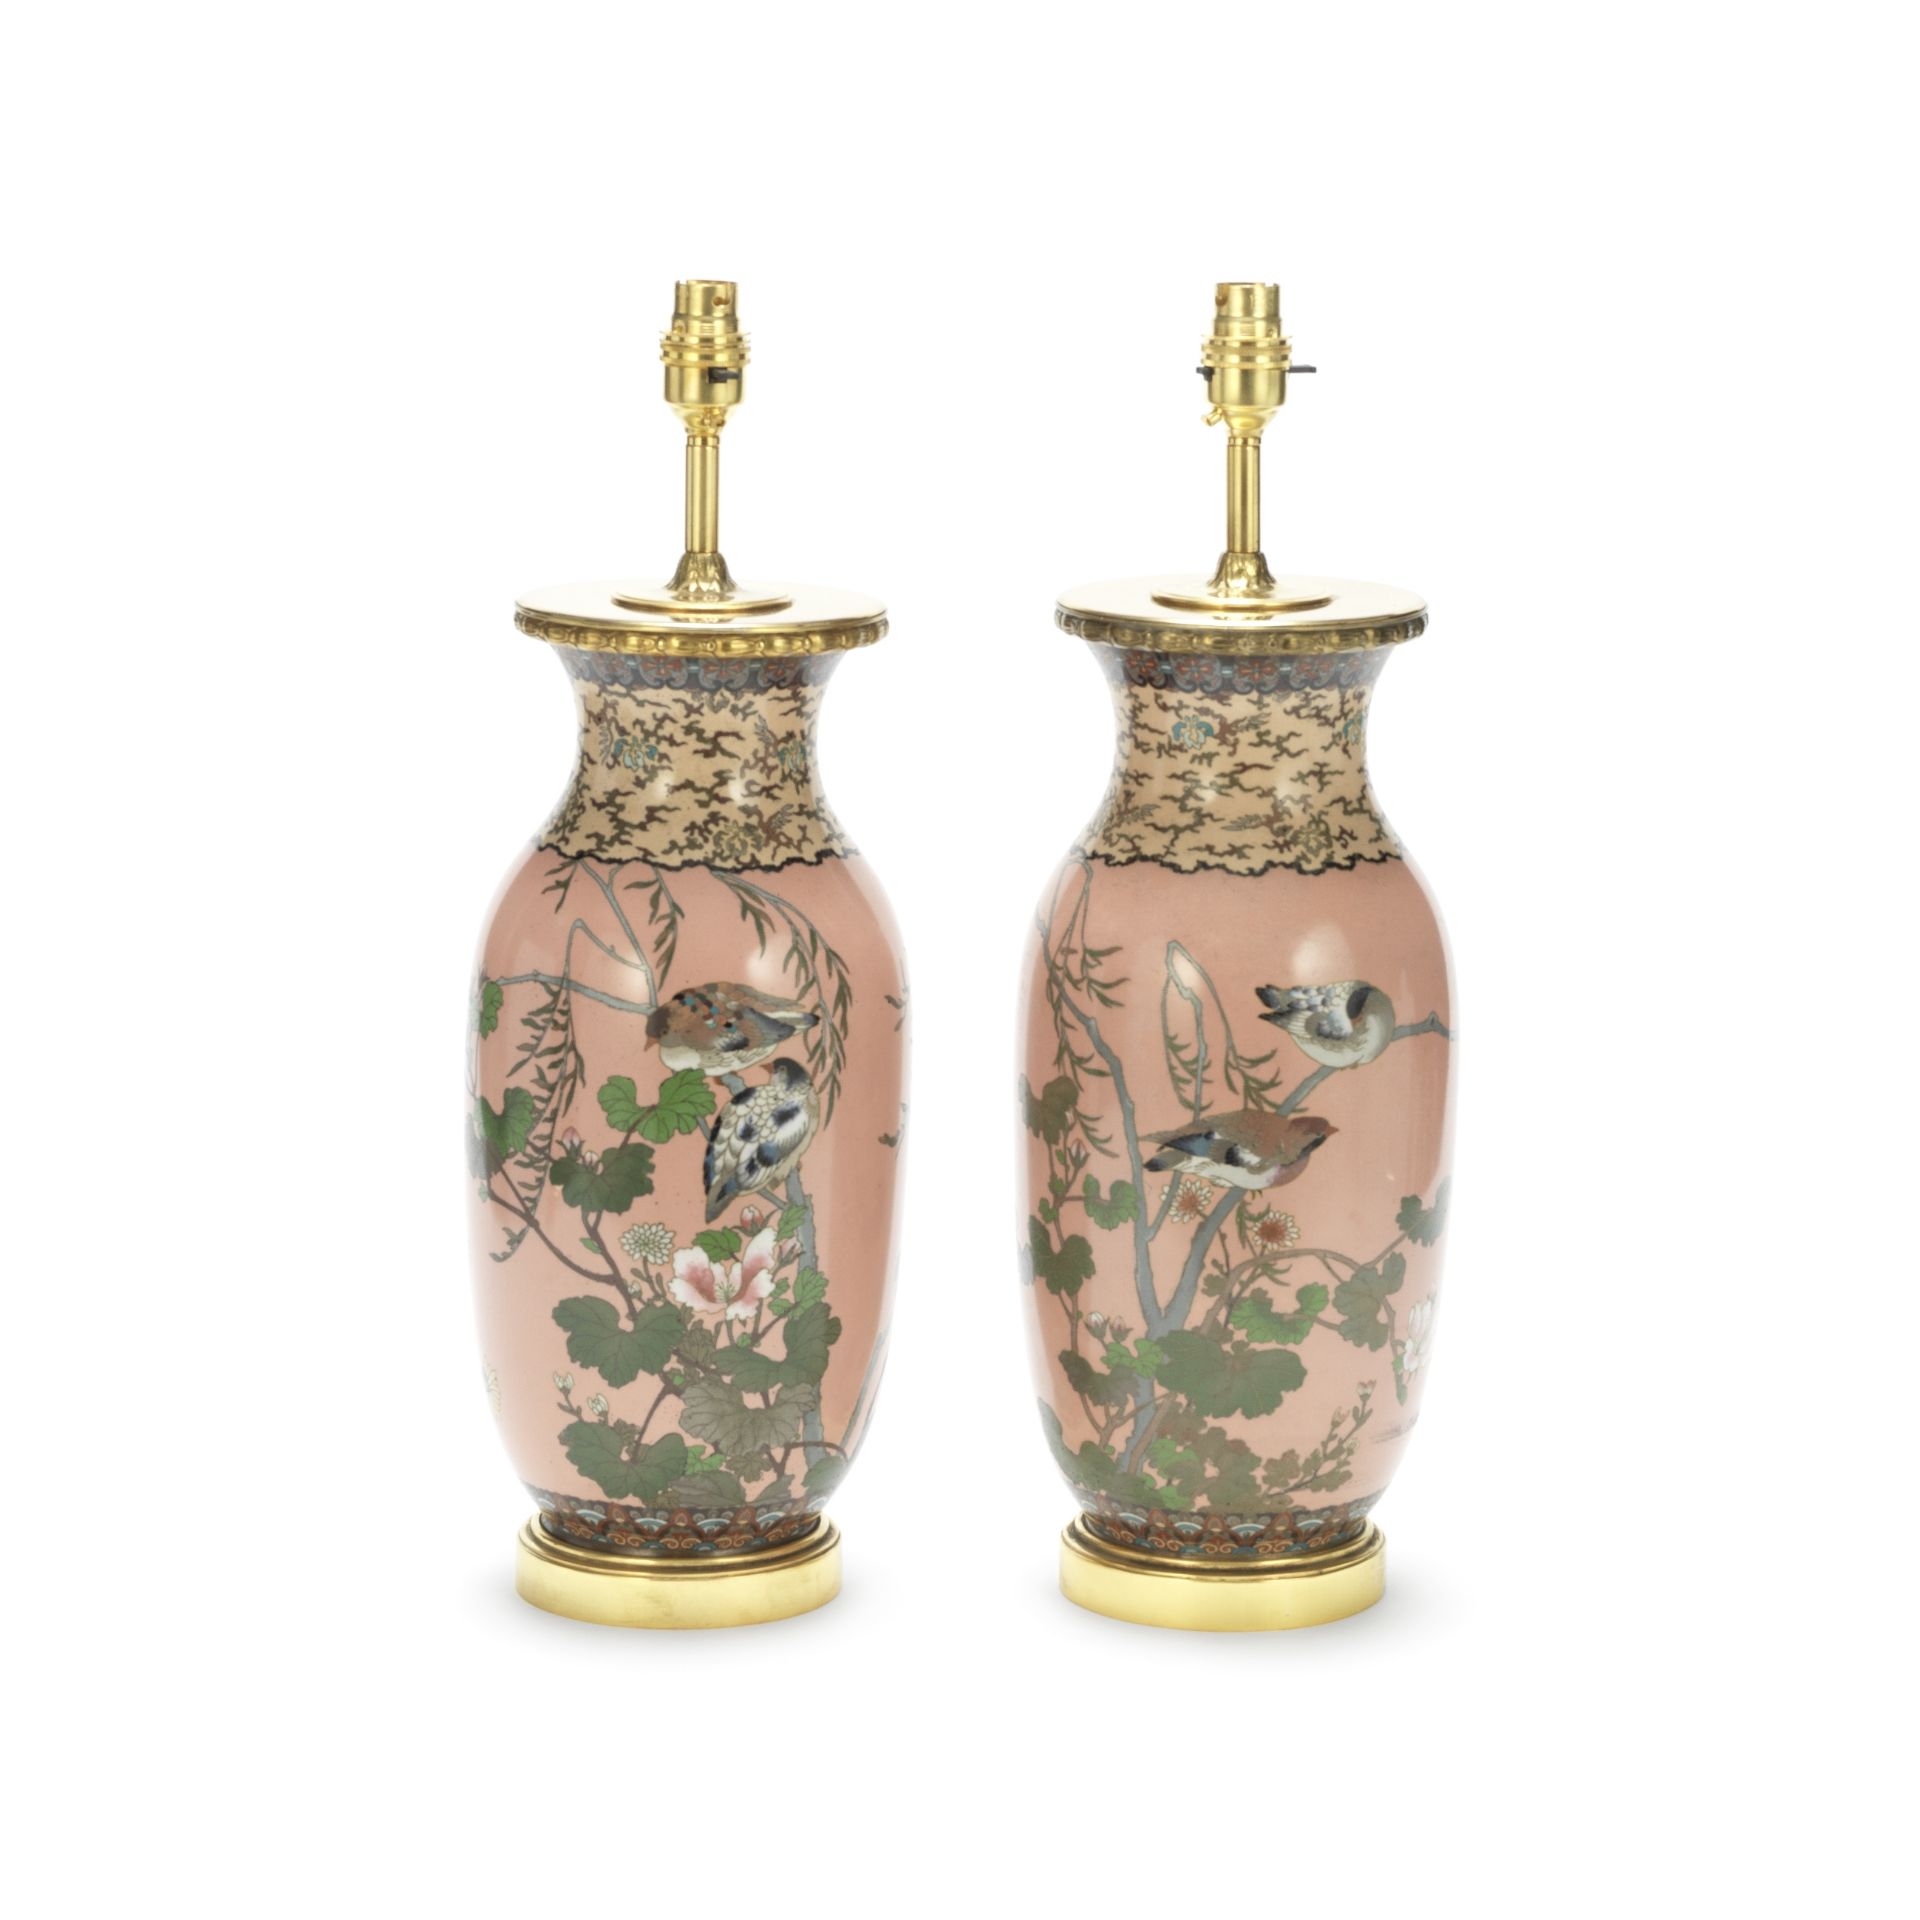 A pair of late 19th century / early 20th century Japanese pink ground cloisonn&#233; baluster vas...